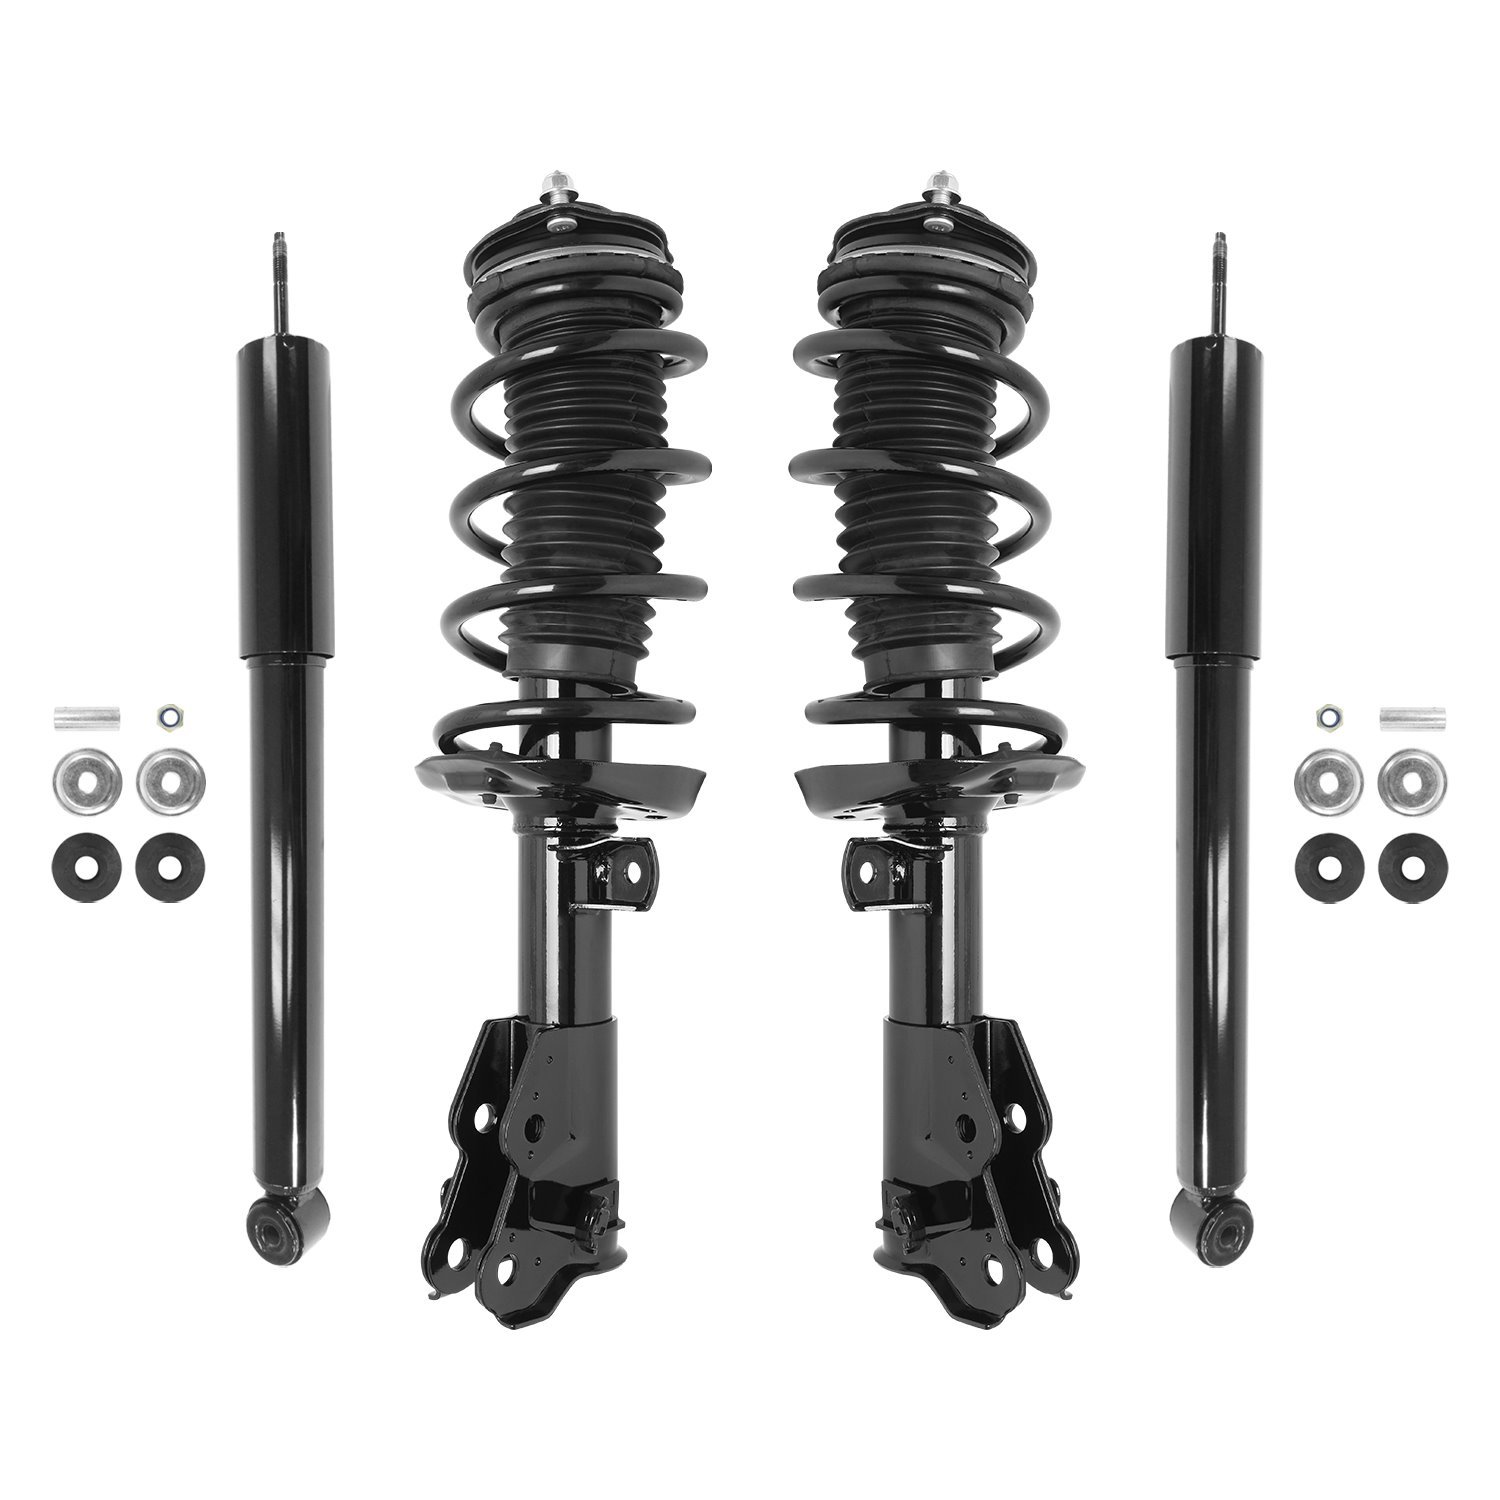 4-11327-253070-001 Front & Rear Suspension Strut & Coil Spring Assembly Fits Select Honda Civic